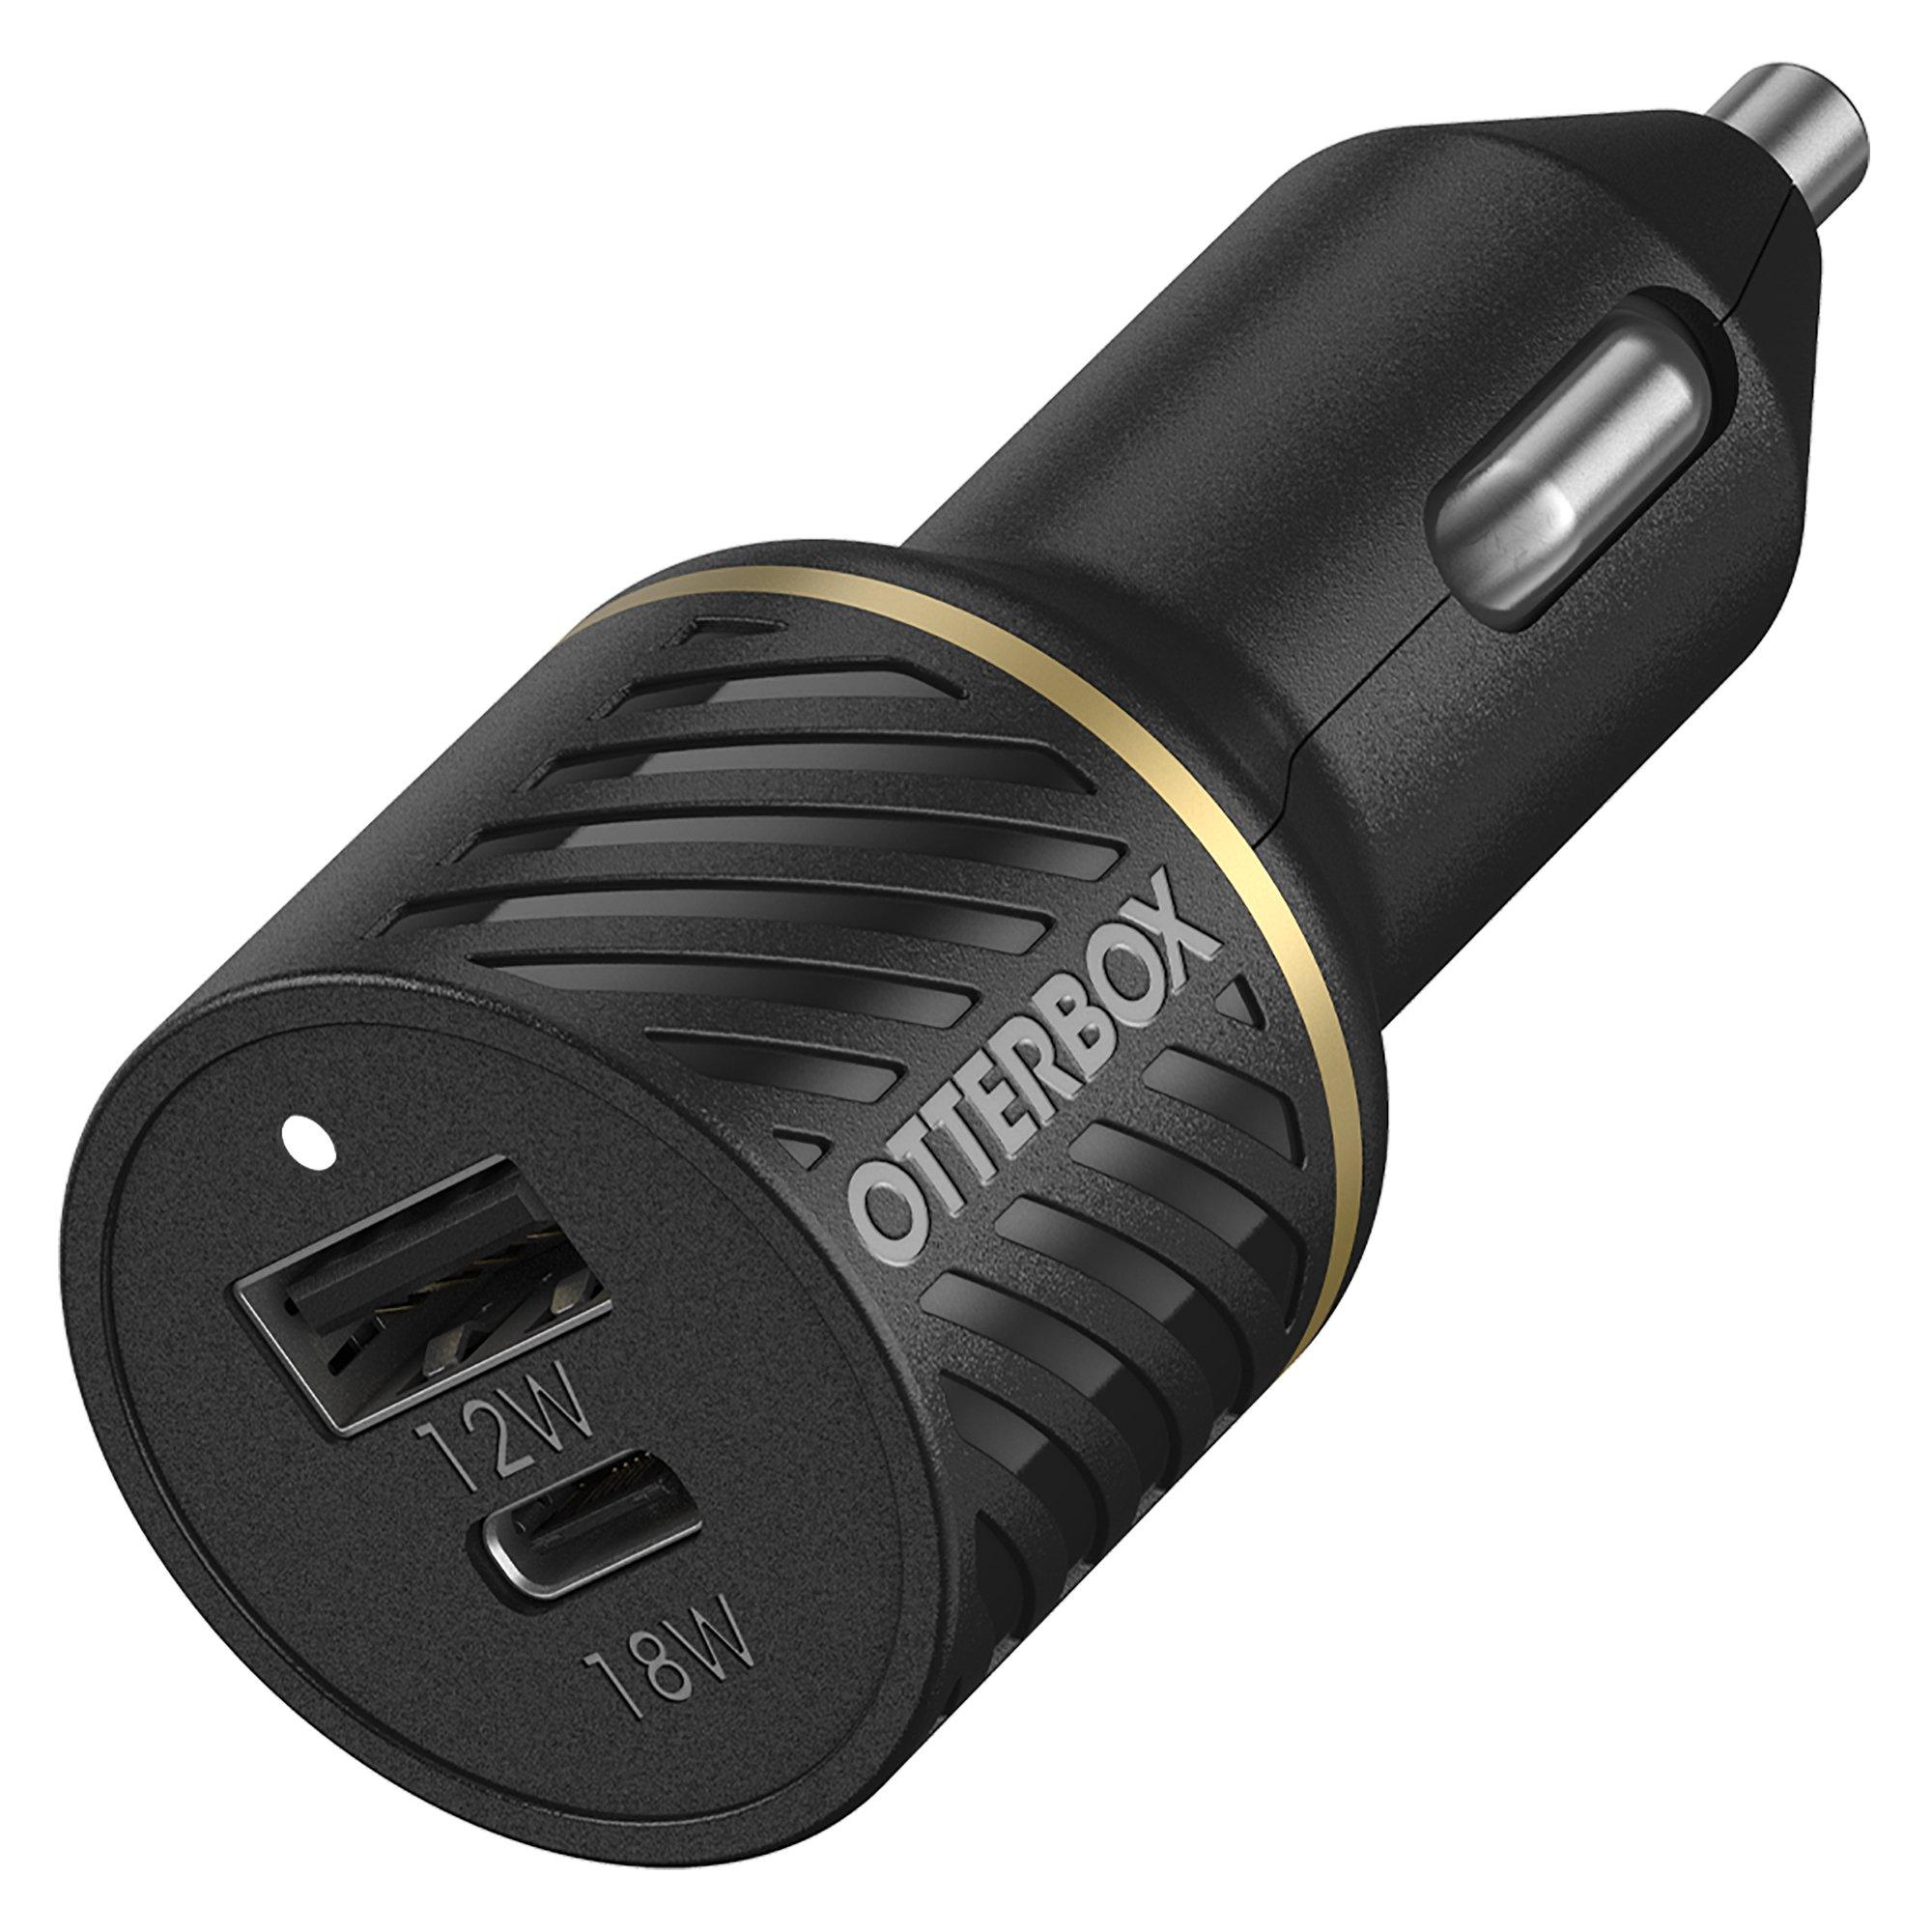 Fast Charge Dual Port USB-C and USB Black Car Charger 30w